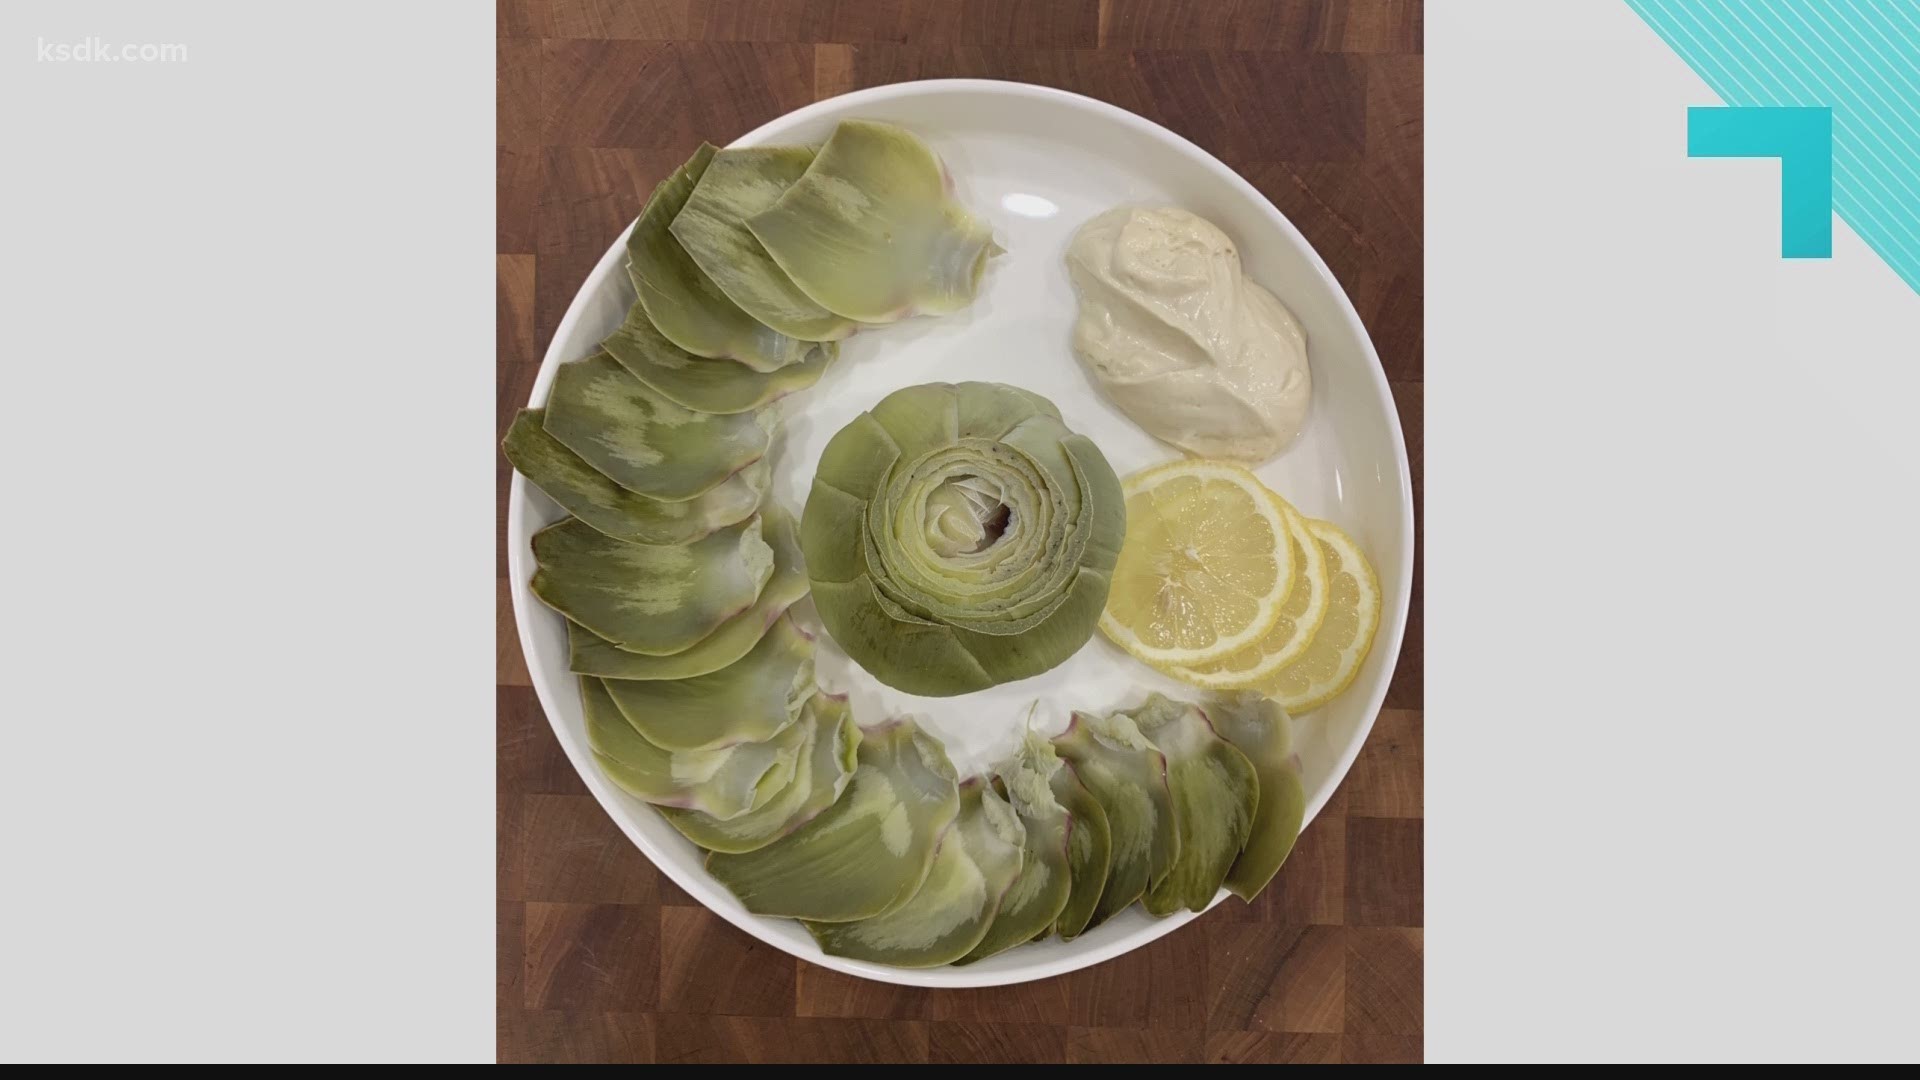 STL Veg Girl - Caryn Dugan shares how to cook a artichoke properly. You can take virtual or in person cooking classes at the Center for Plant Based Living.